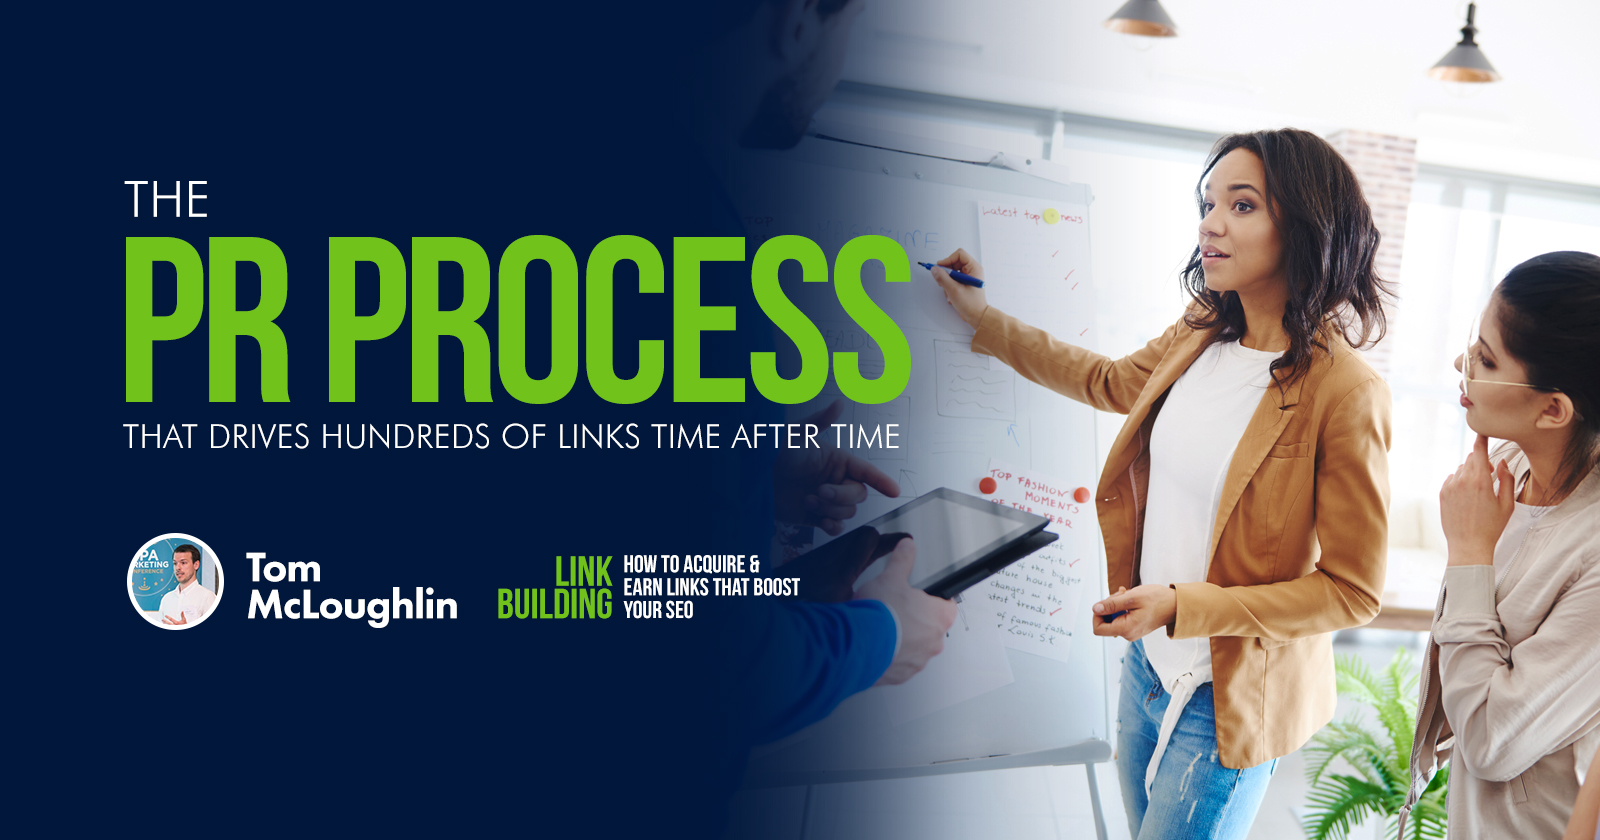 LB Guide - The PR Process That Drives Hundreds of Links Time After Time - Tom McLoughlin